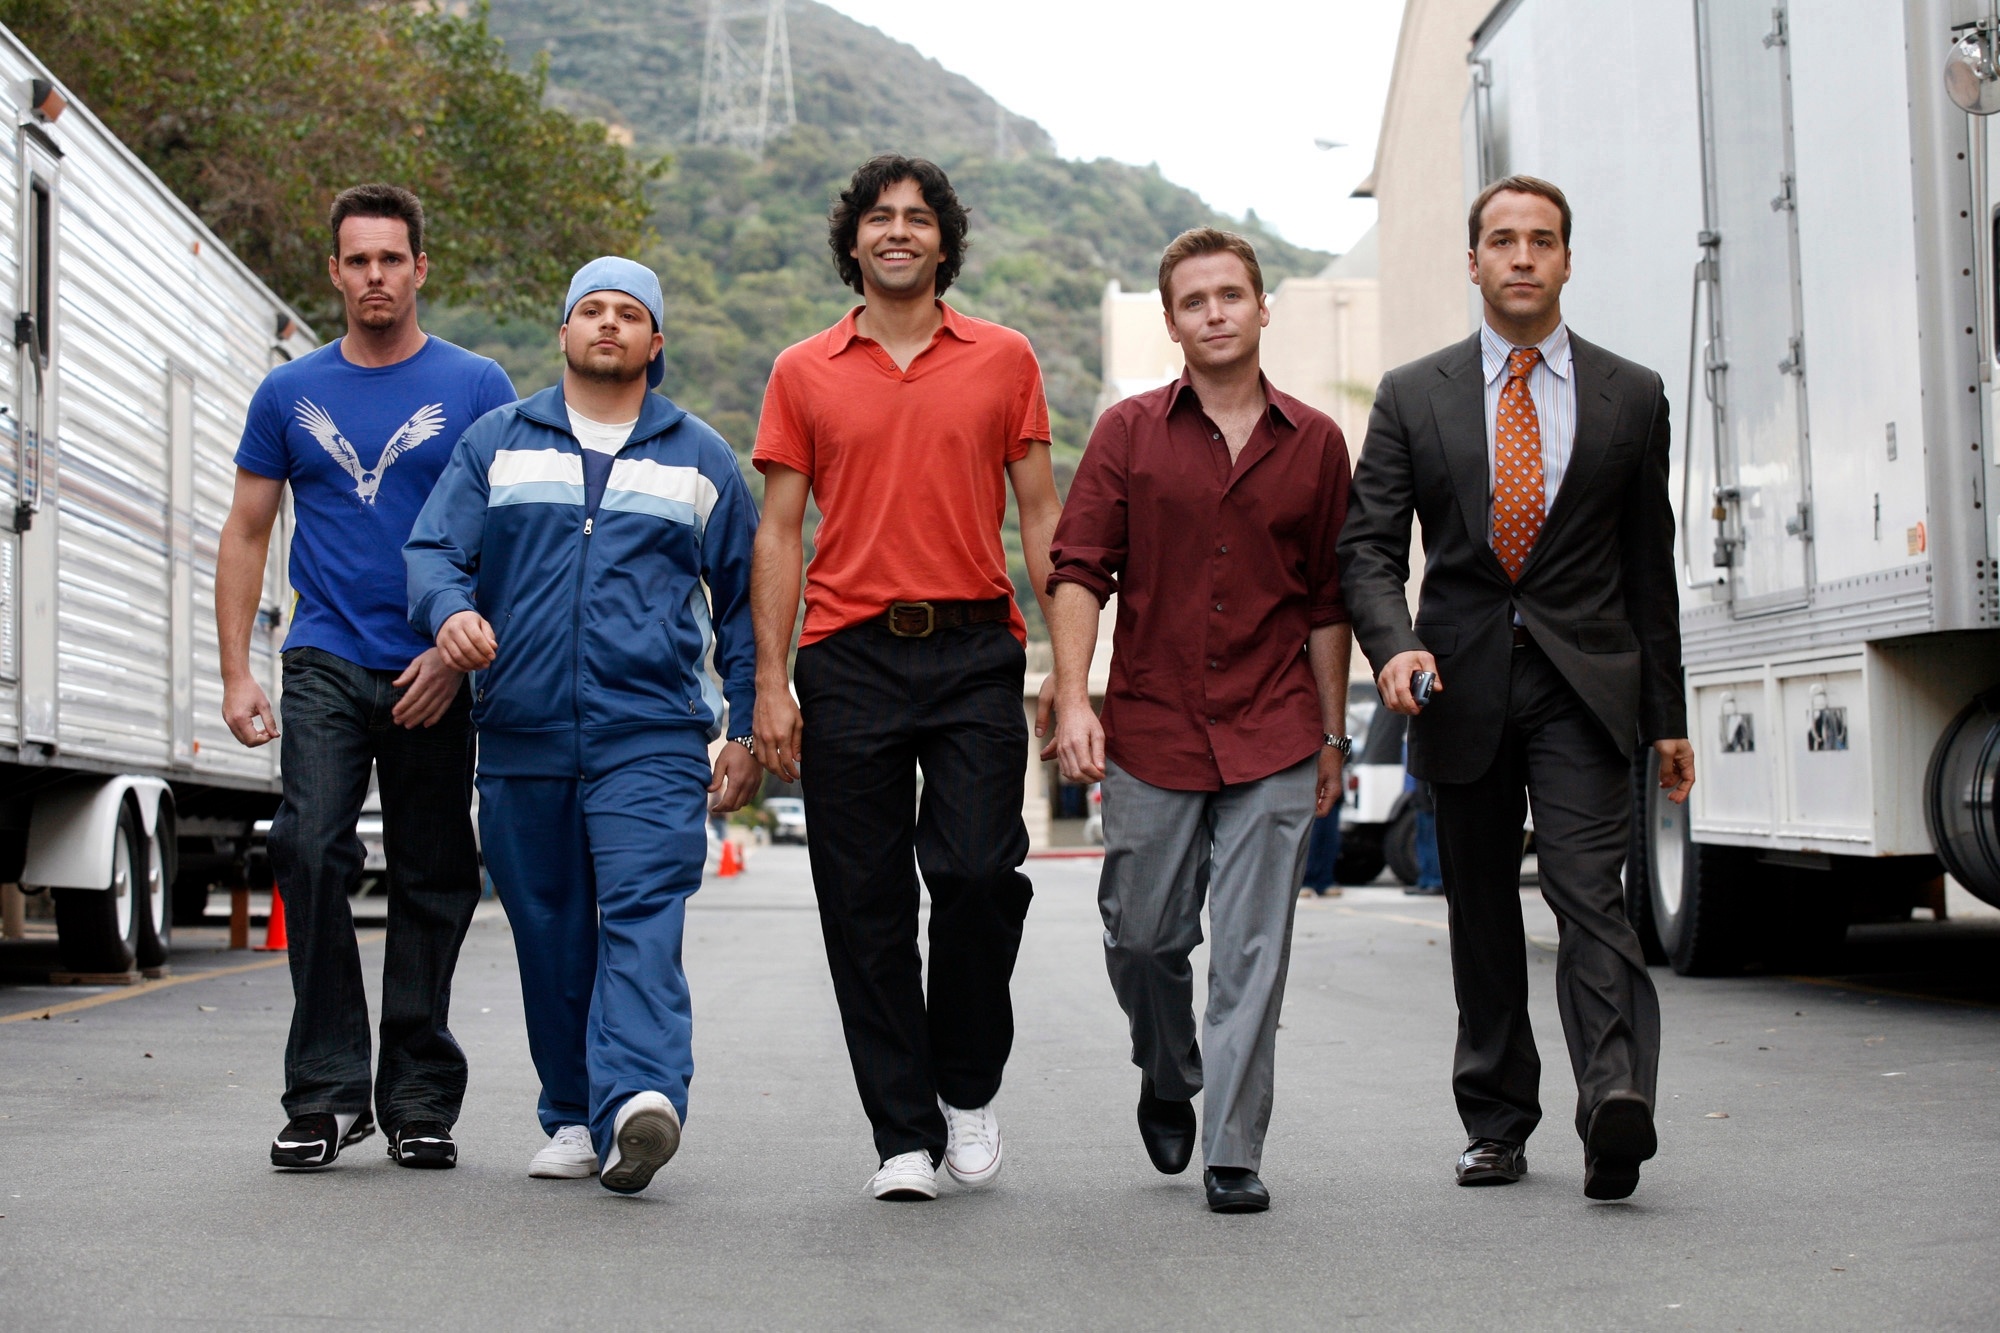 Entourage (TV Series): The show's premise is loosely based on Mark Wahlberg's experiences as an up-and-coming film star. 2000x1340 HD Wallpaper.